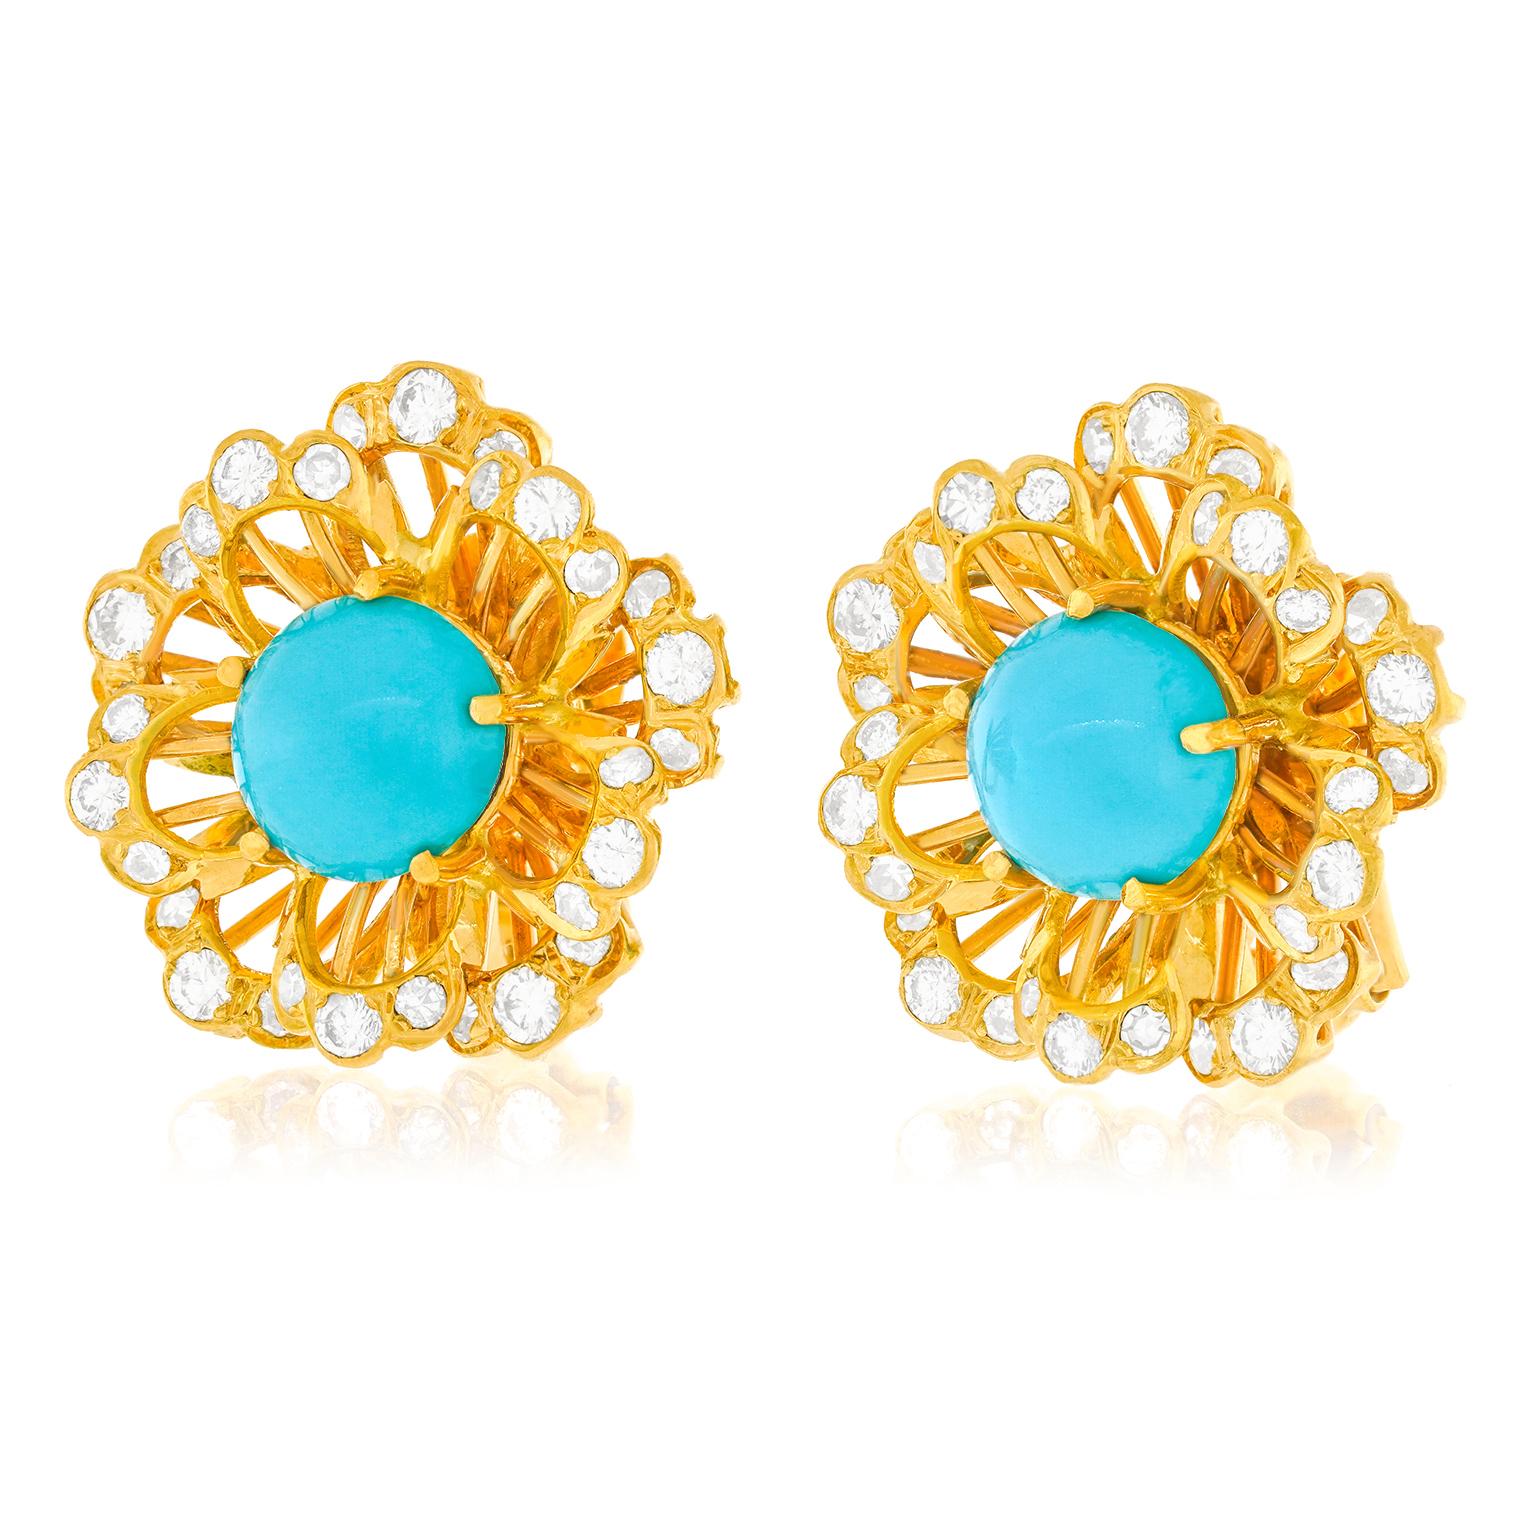 Cabochon Fifties Turquoise and Diamond Earrings